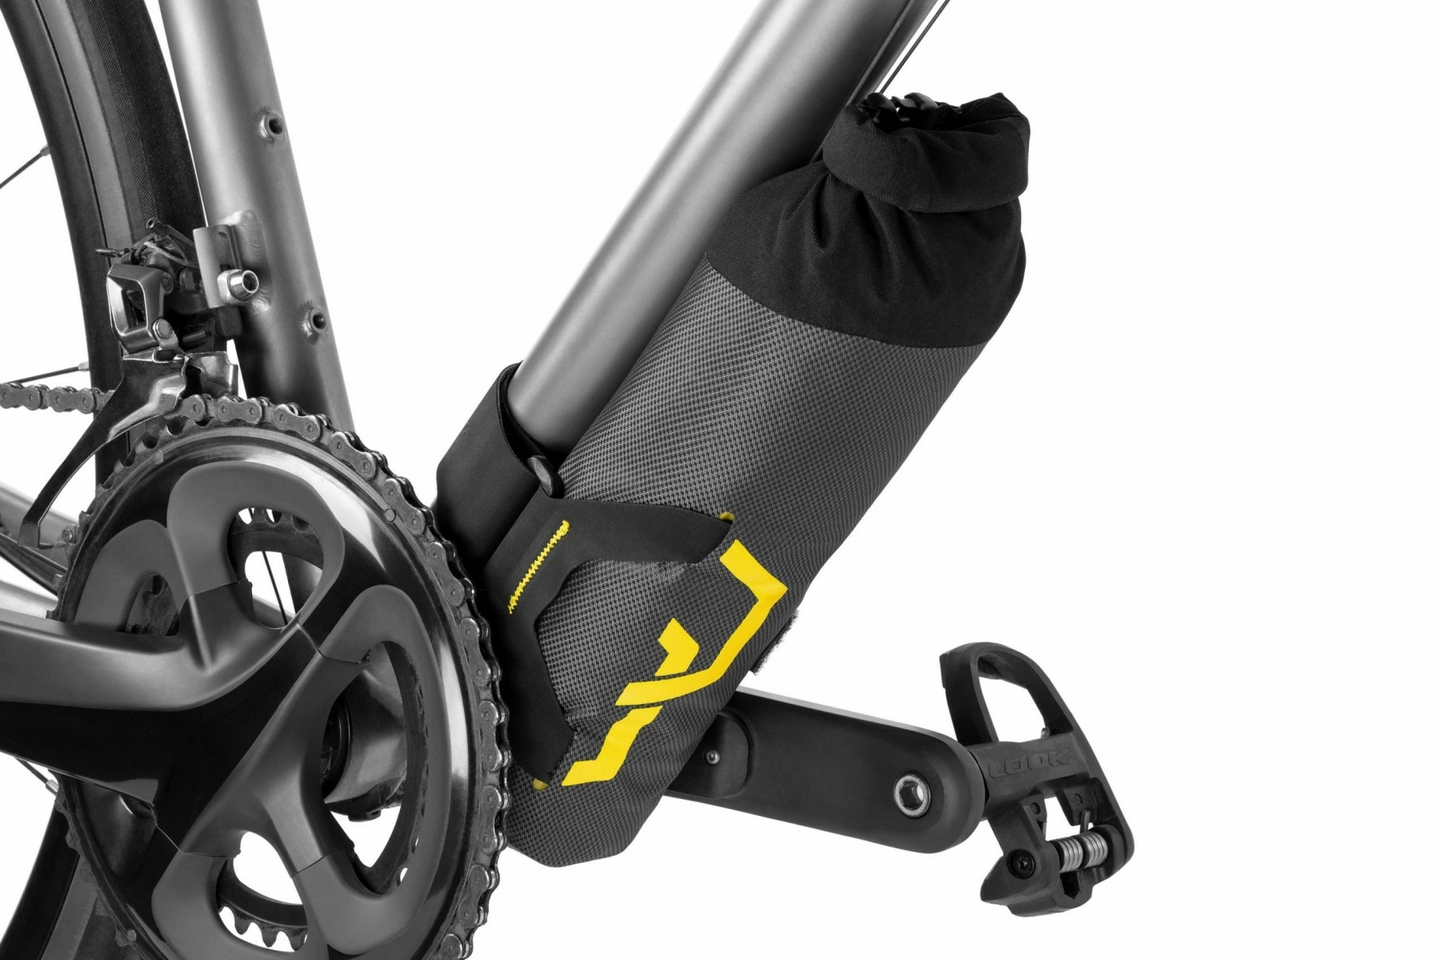 apidura-expedition-downtube-pack-1-5l-on-bike-2-hires-scaled